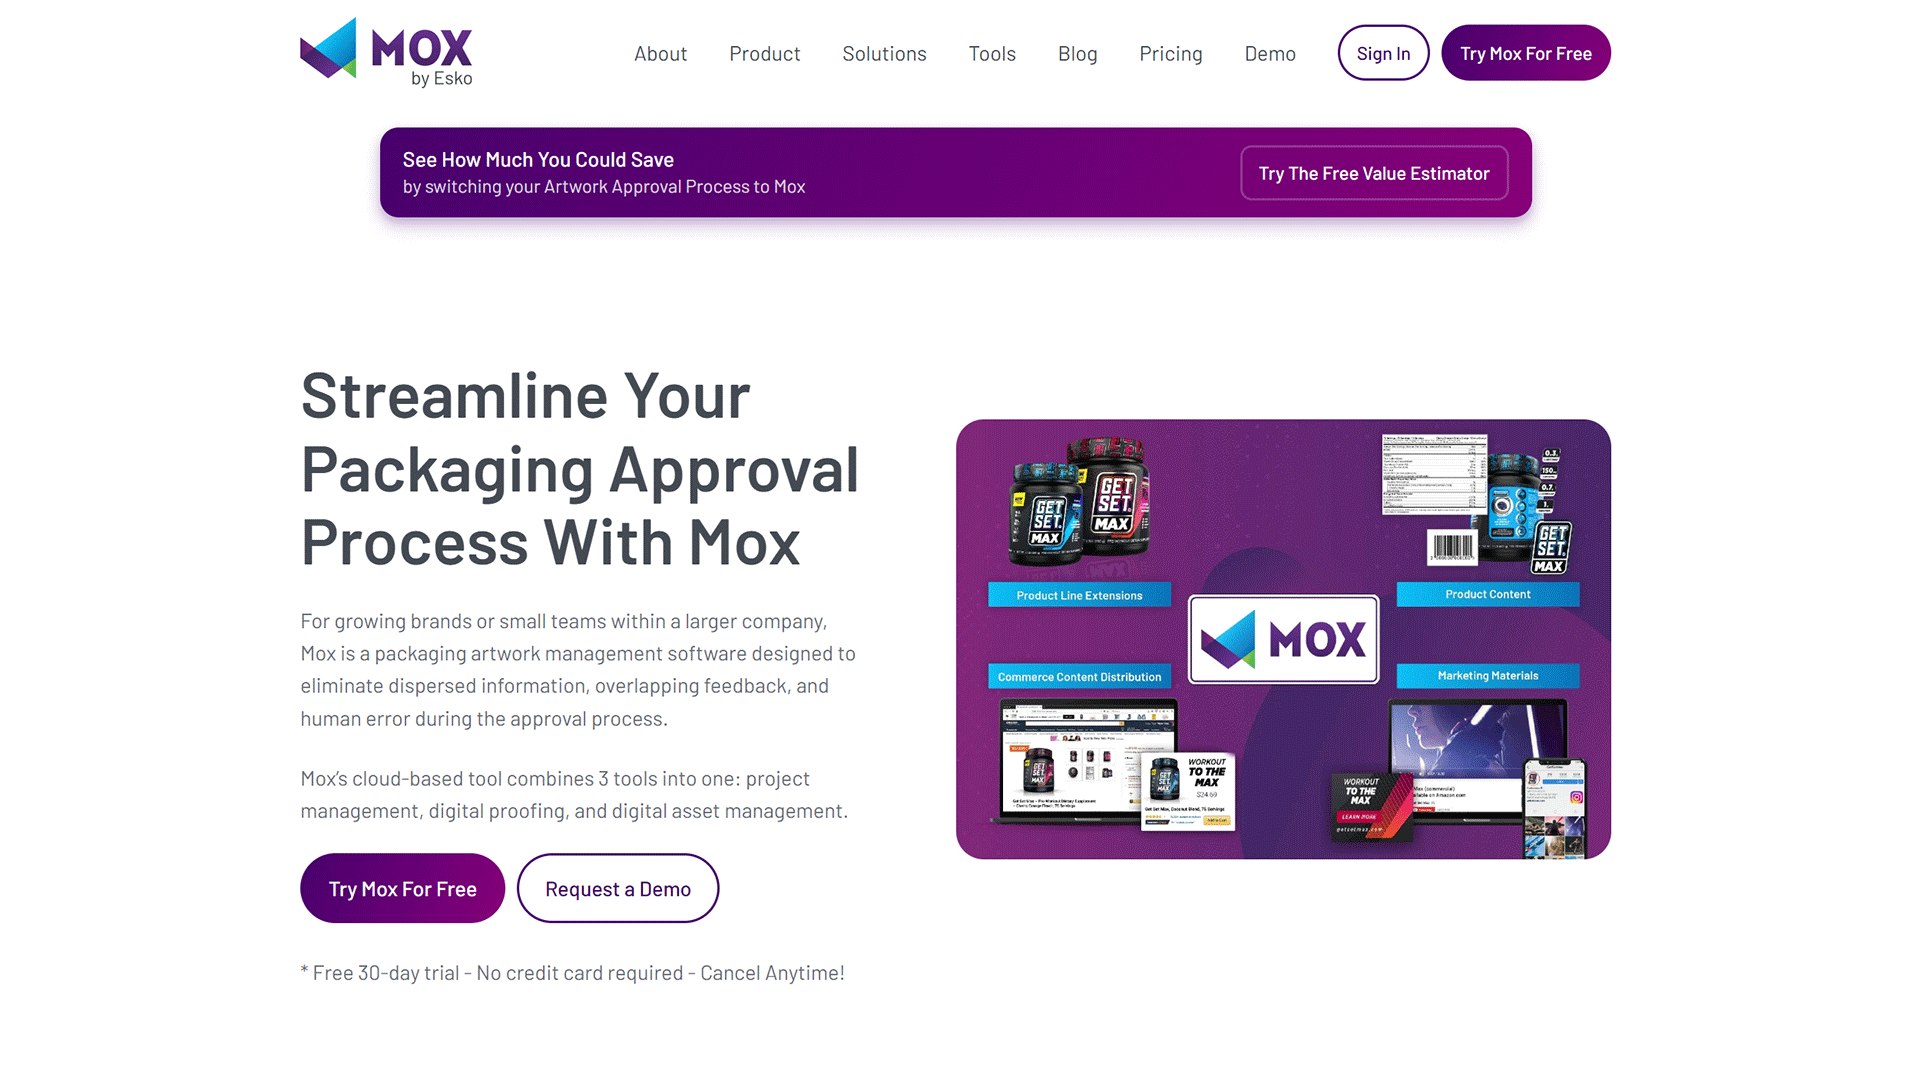 The beautiful moxsoftware.com website created with Act3 on the HubSpot CMS